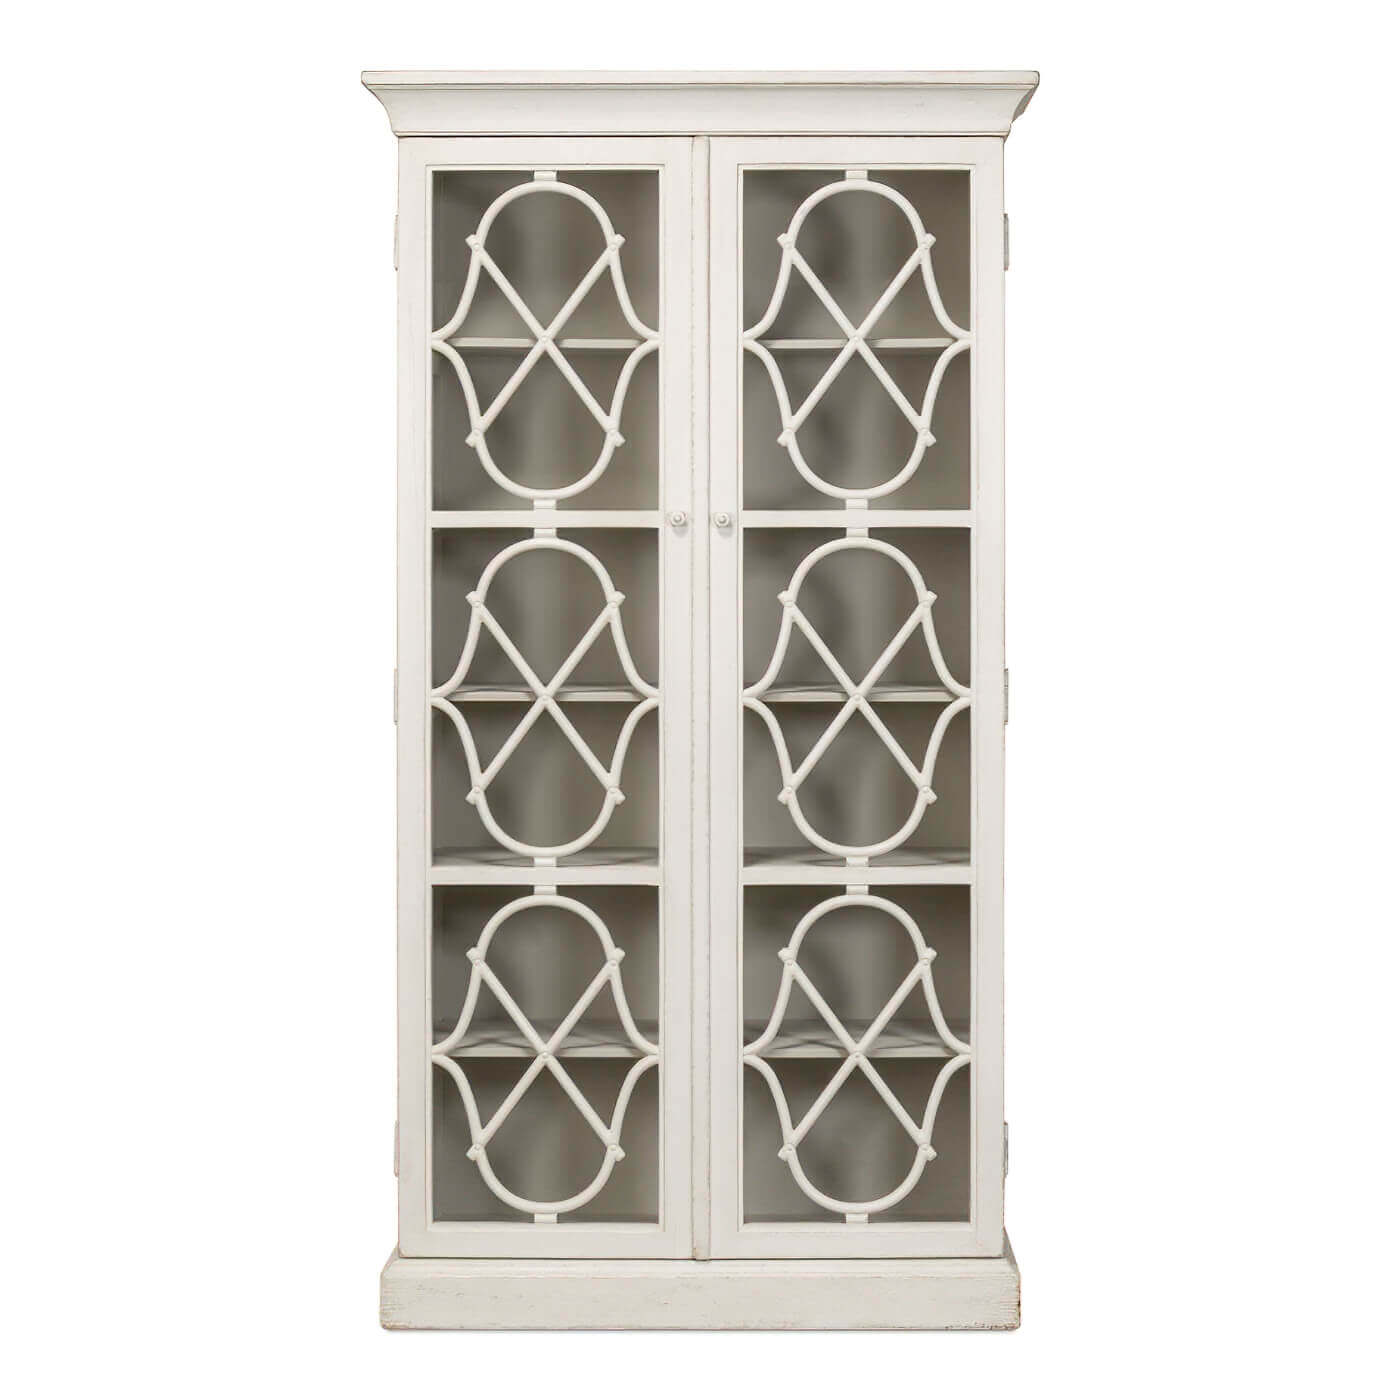 French Antique White Display Cabinet - English Georgian America